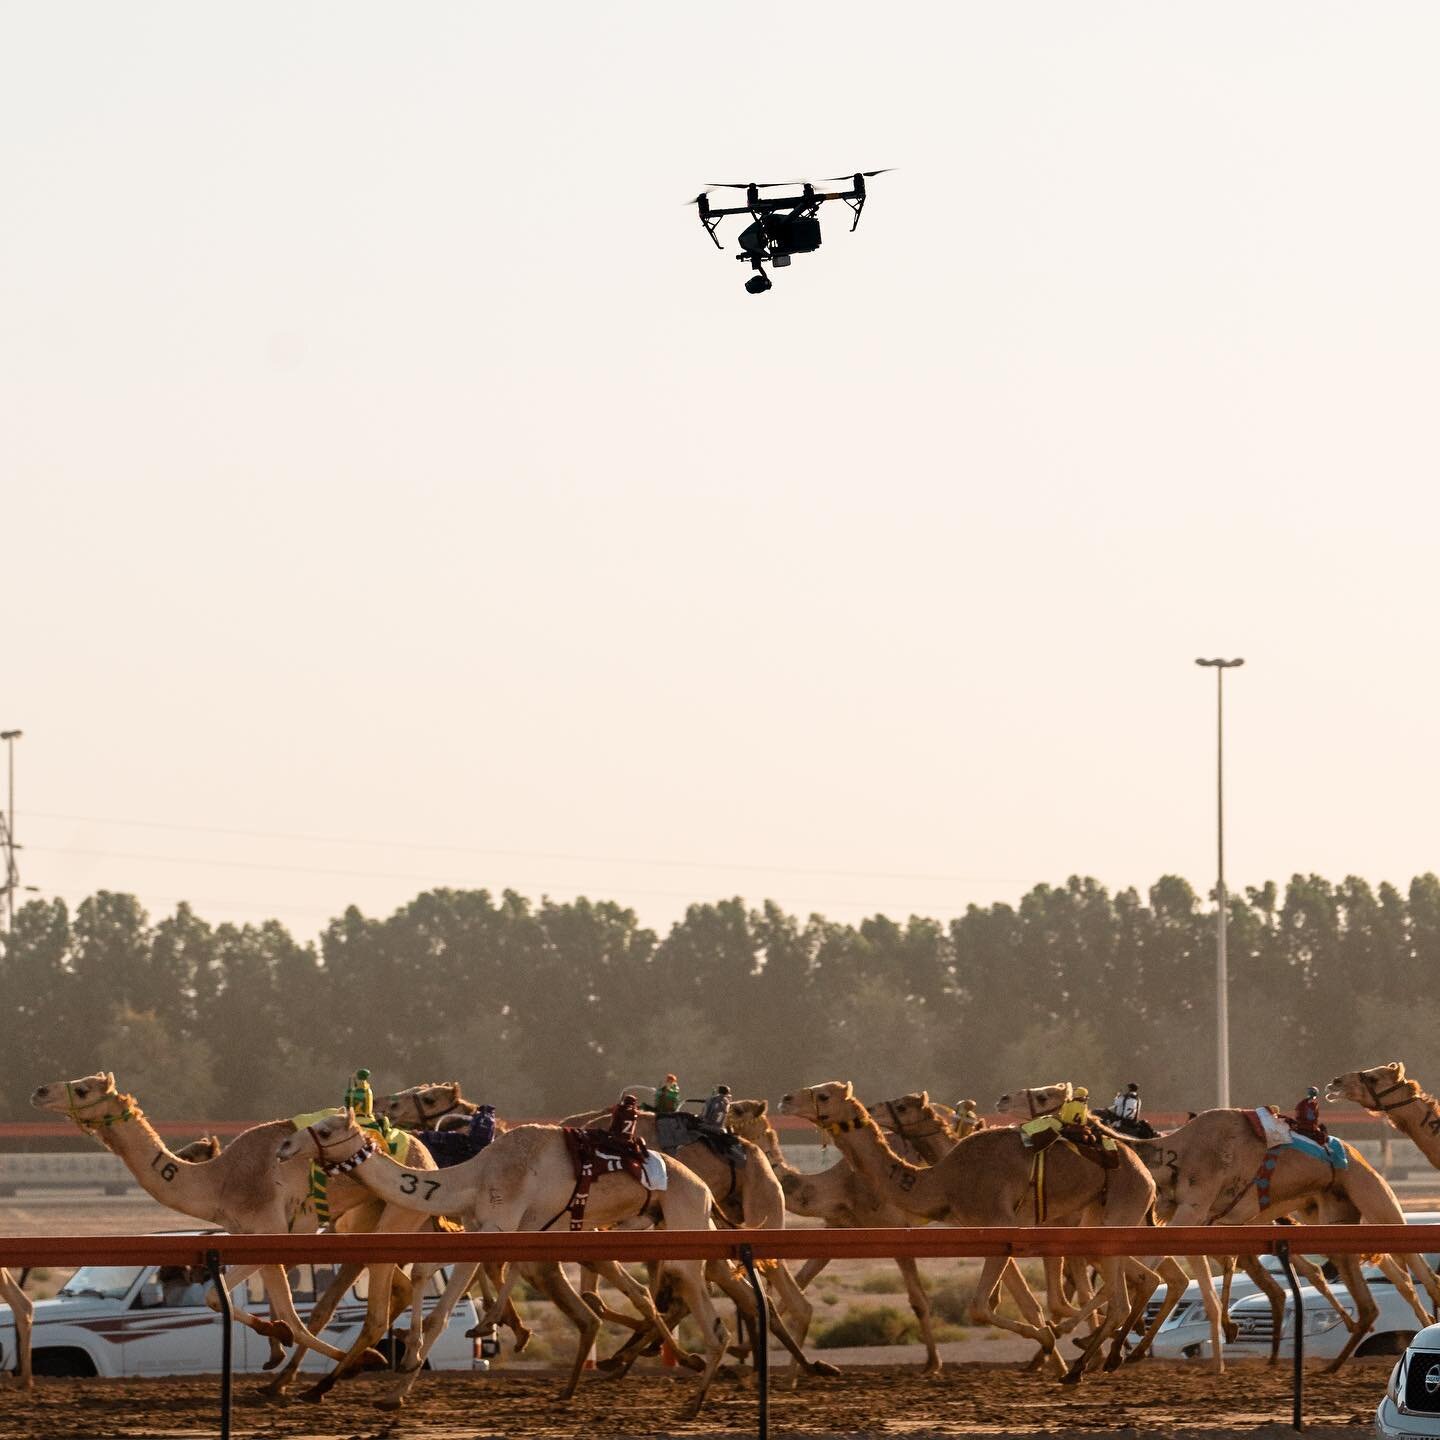 12 Days of camel race live steam coming to wrap soon. Everyday sunrise to sunset. We are going to miss this weather.

#drone #uae #tourism #live #broadcast #aerial #film